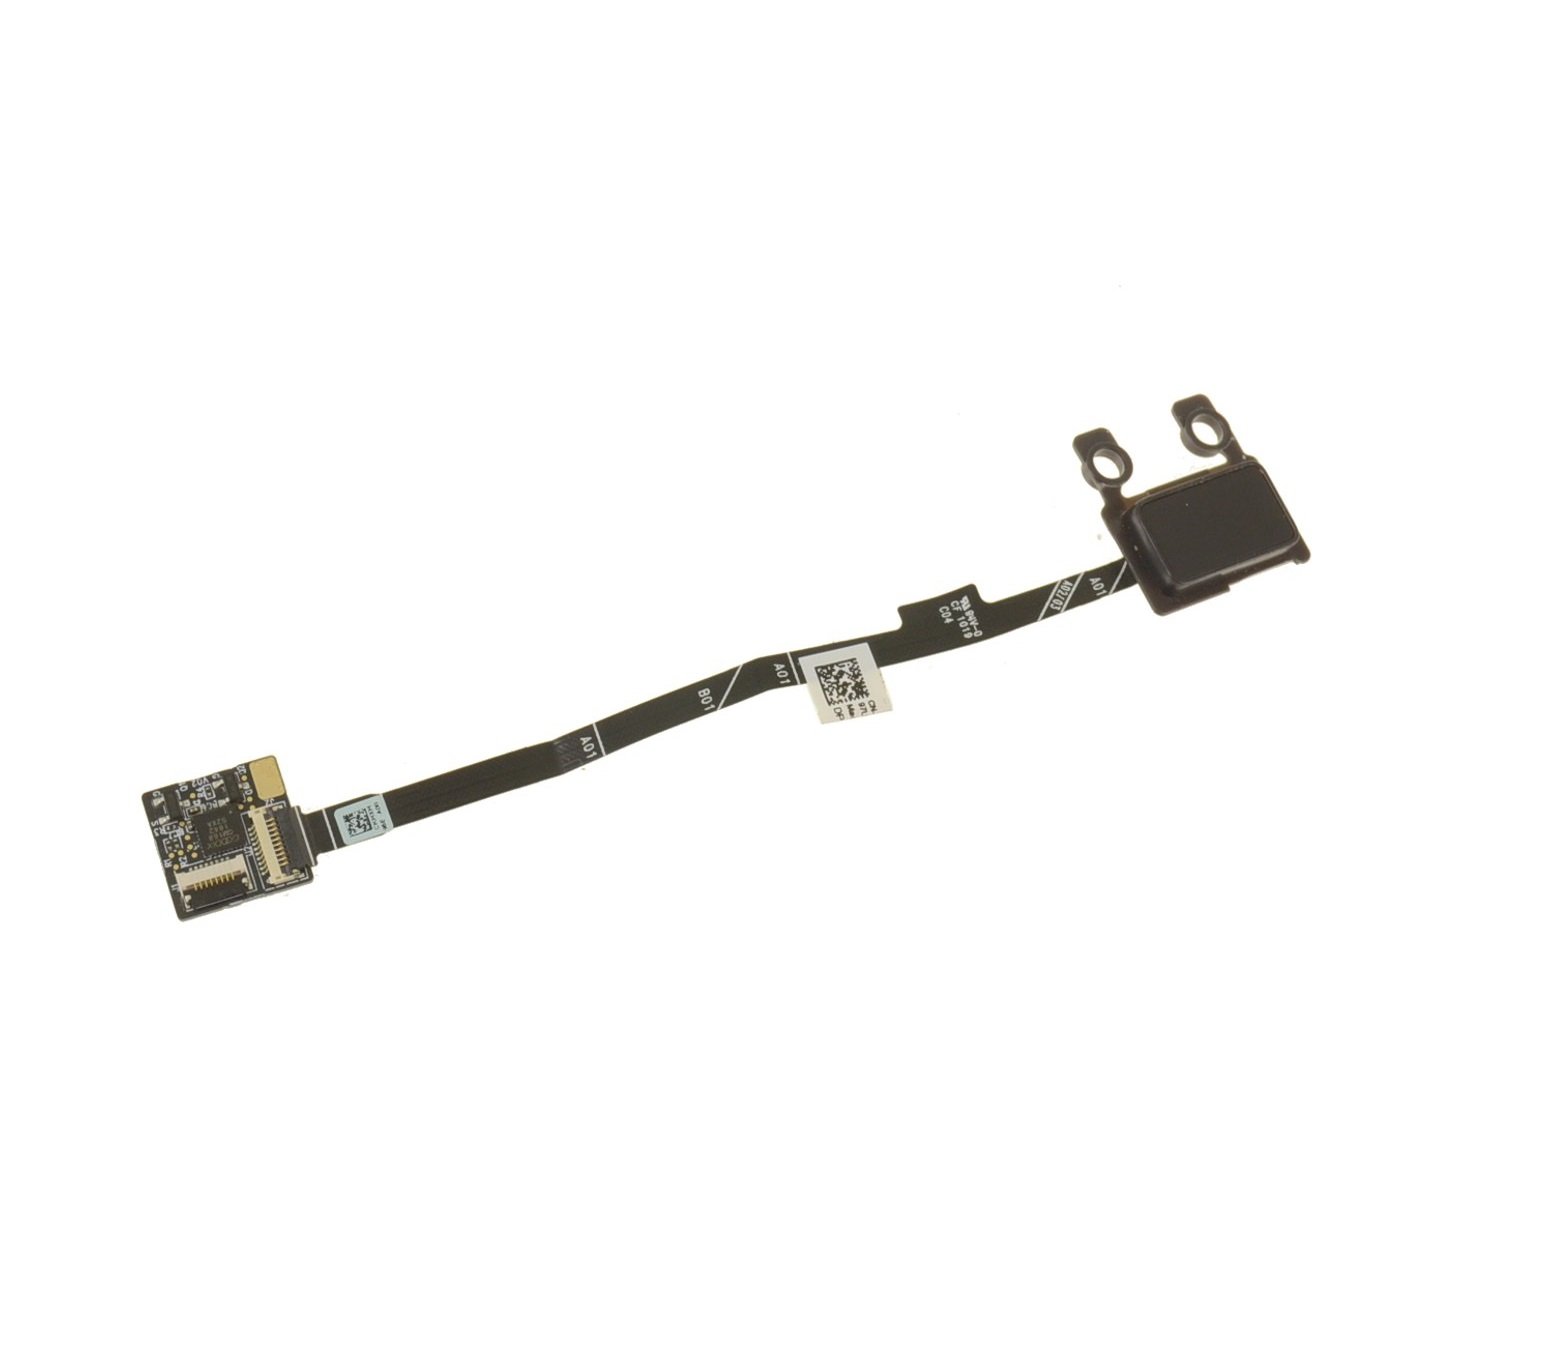 Dell Inspiron 7390 7391 2in1 OEM Fingerprint Reader Power Button Board with Cable P/N CKHXH, 0CKHXH